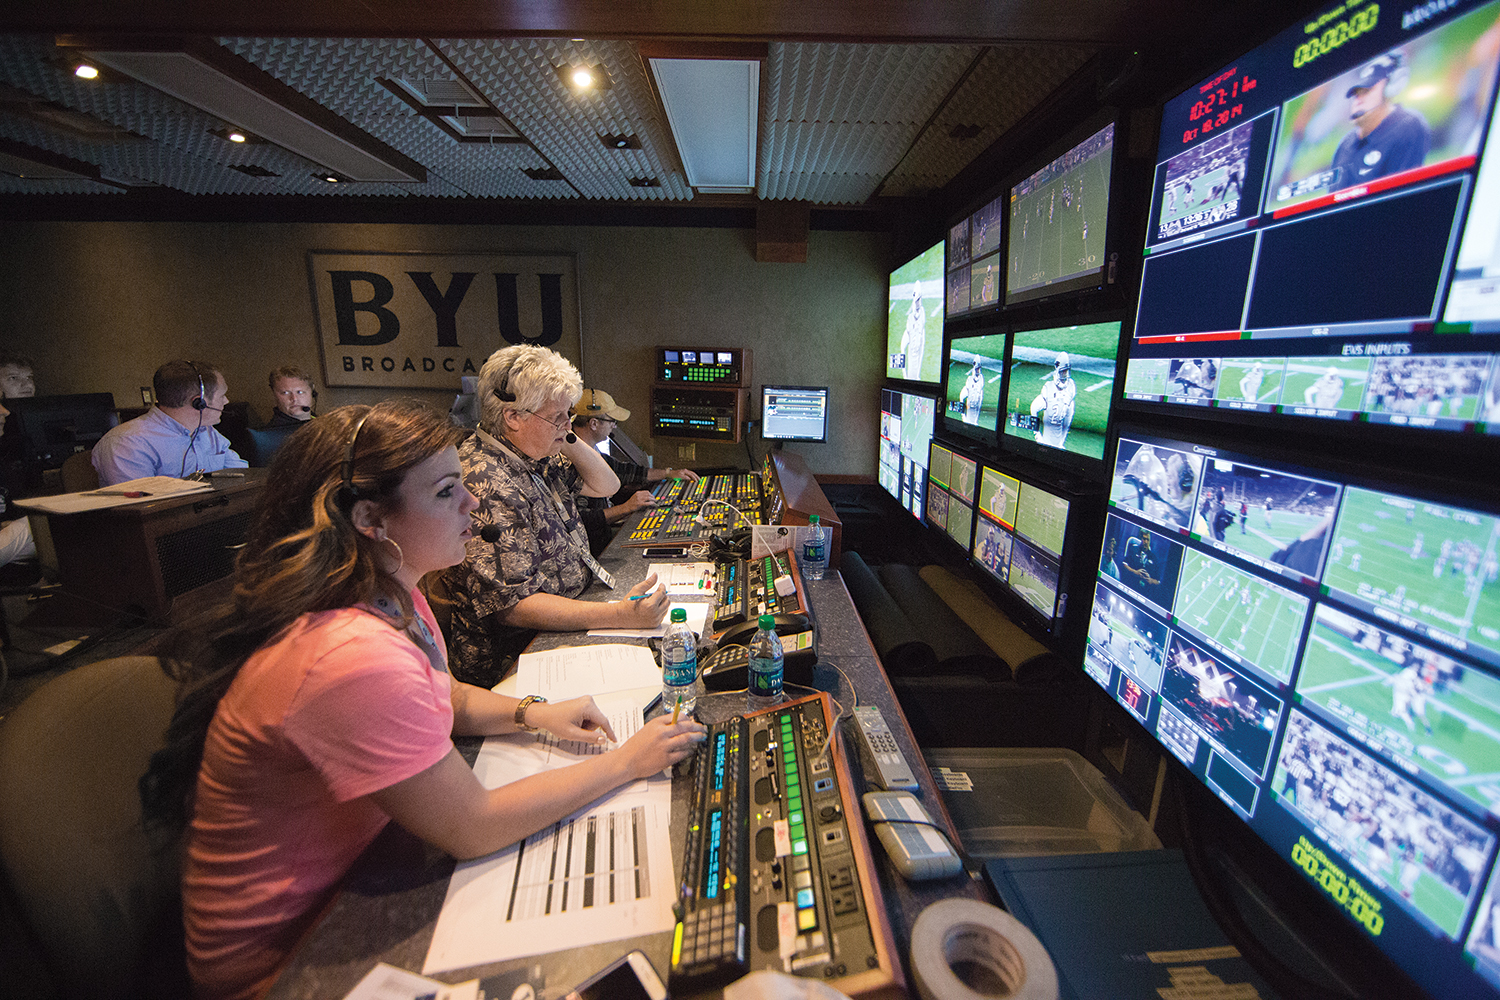 The BYUtv production crew puts together a game broadcast from a truck in the parking lot.